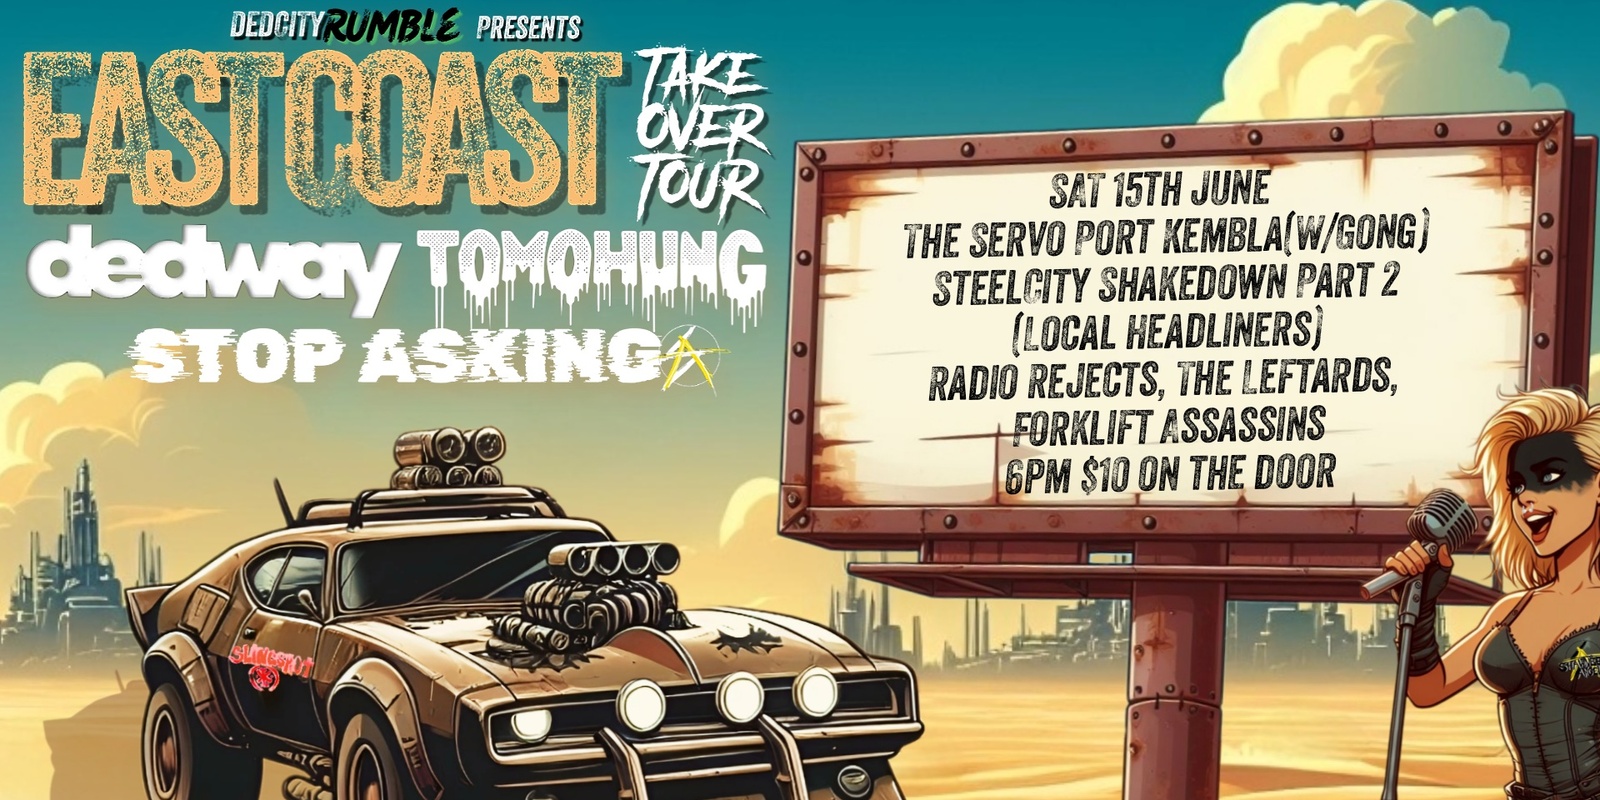 Banner image for DEDCITY RUMBLE EAST COAST TAKEOVER  tour '24 - STEEL CITY SHAKEDOWN